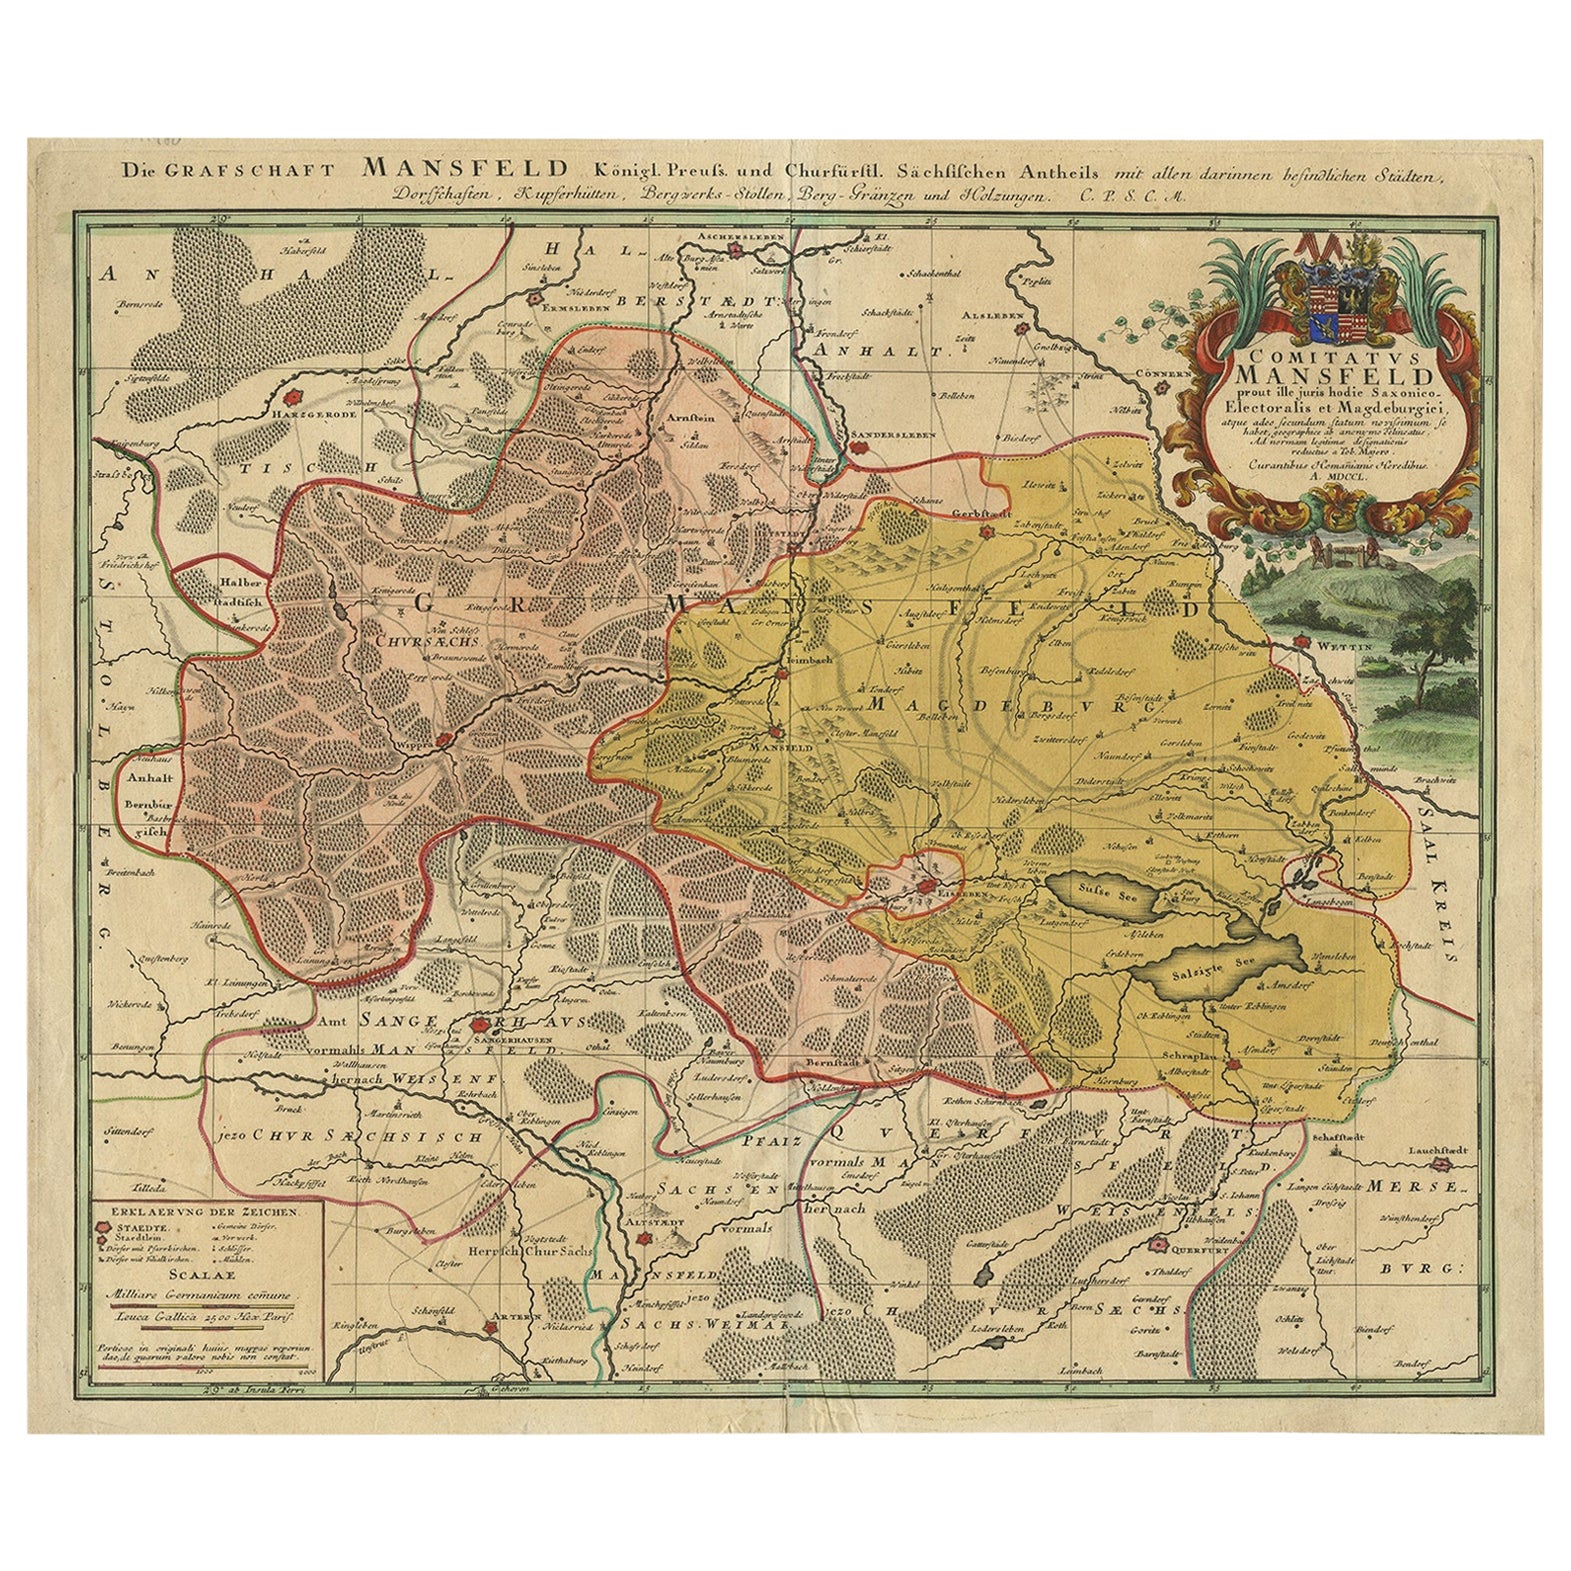 Detailed Antique Map Showing Mansfeld in Saxony-Anhalt, Germany, ca.1750